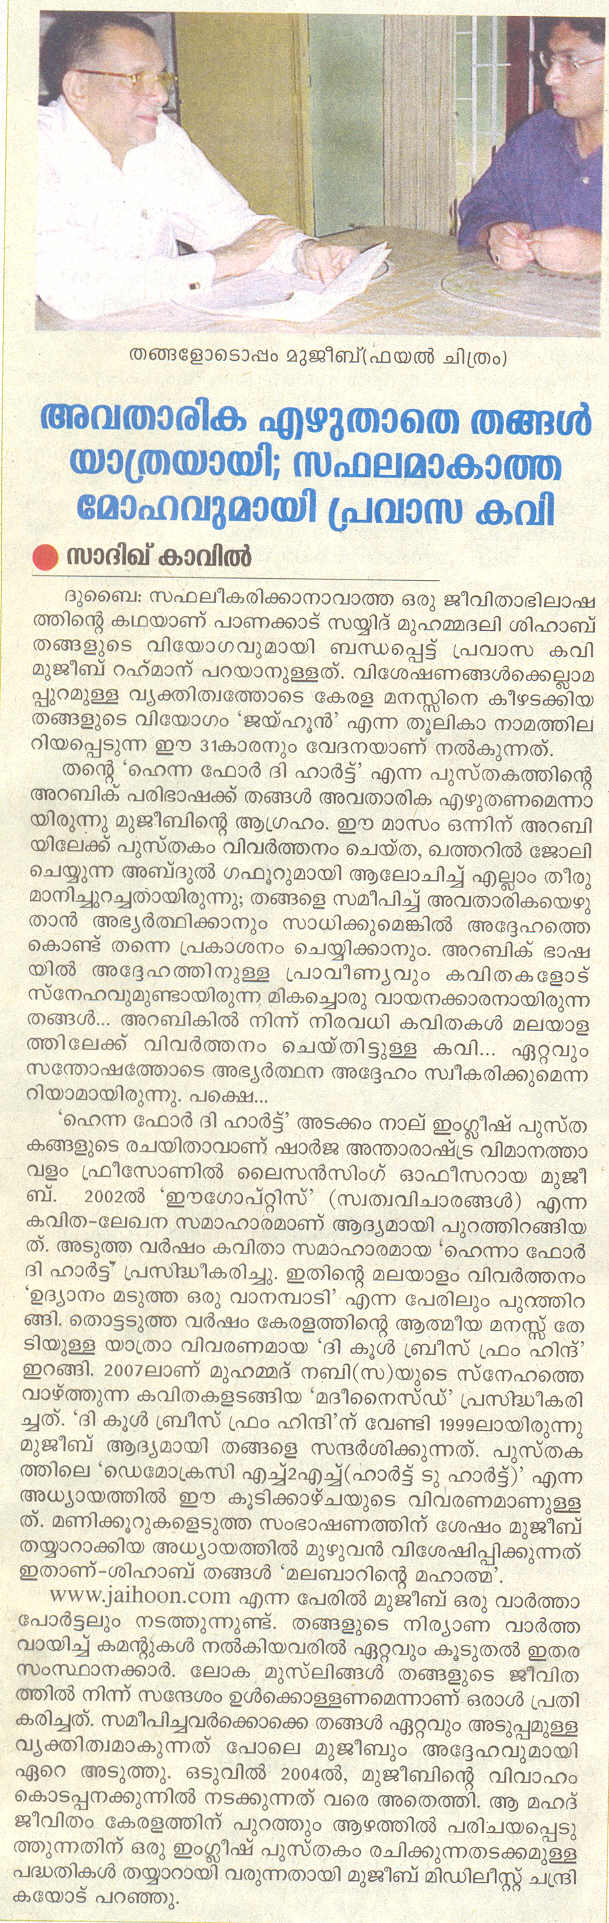 Middle East Chandrika report, Aug 07 2009